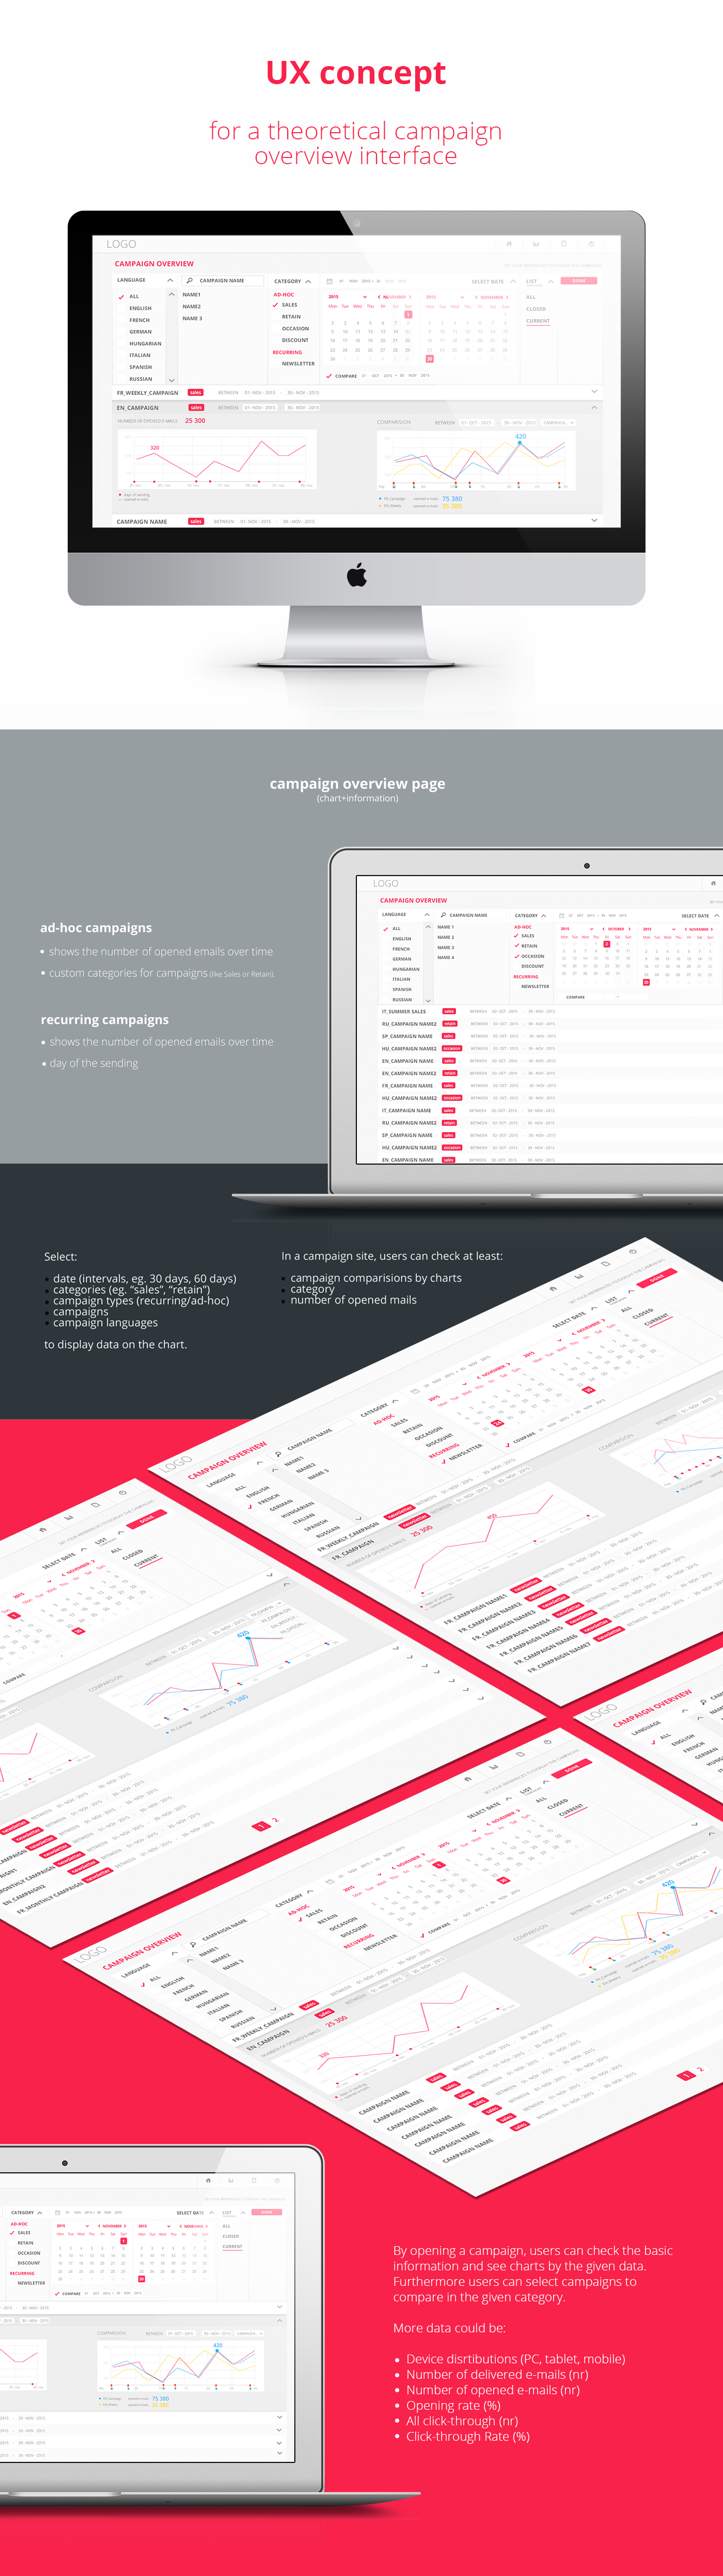 dashboard Interface ux campaign overview campaign chart UX concept